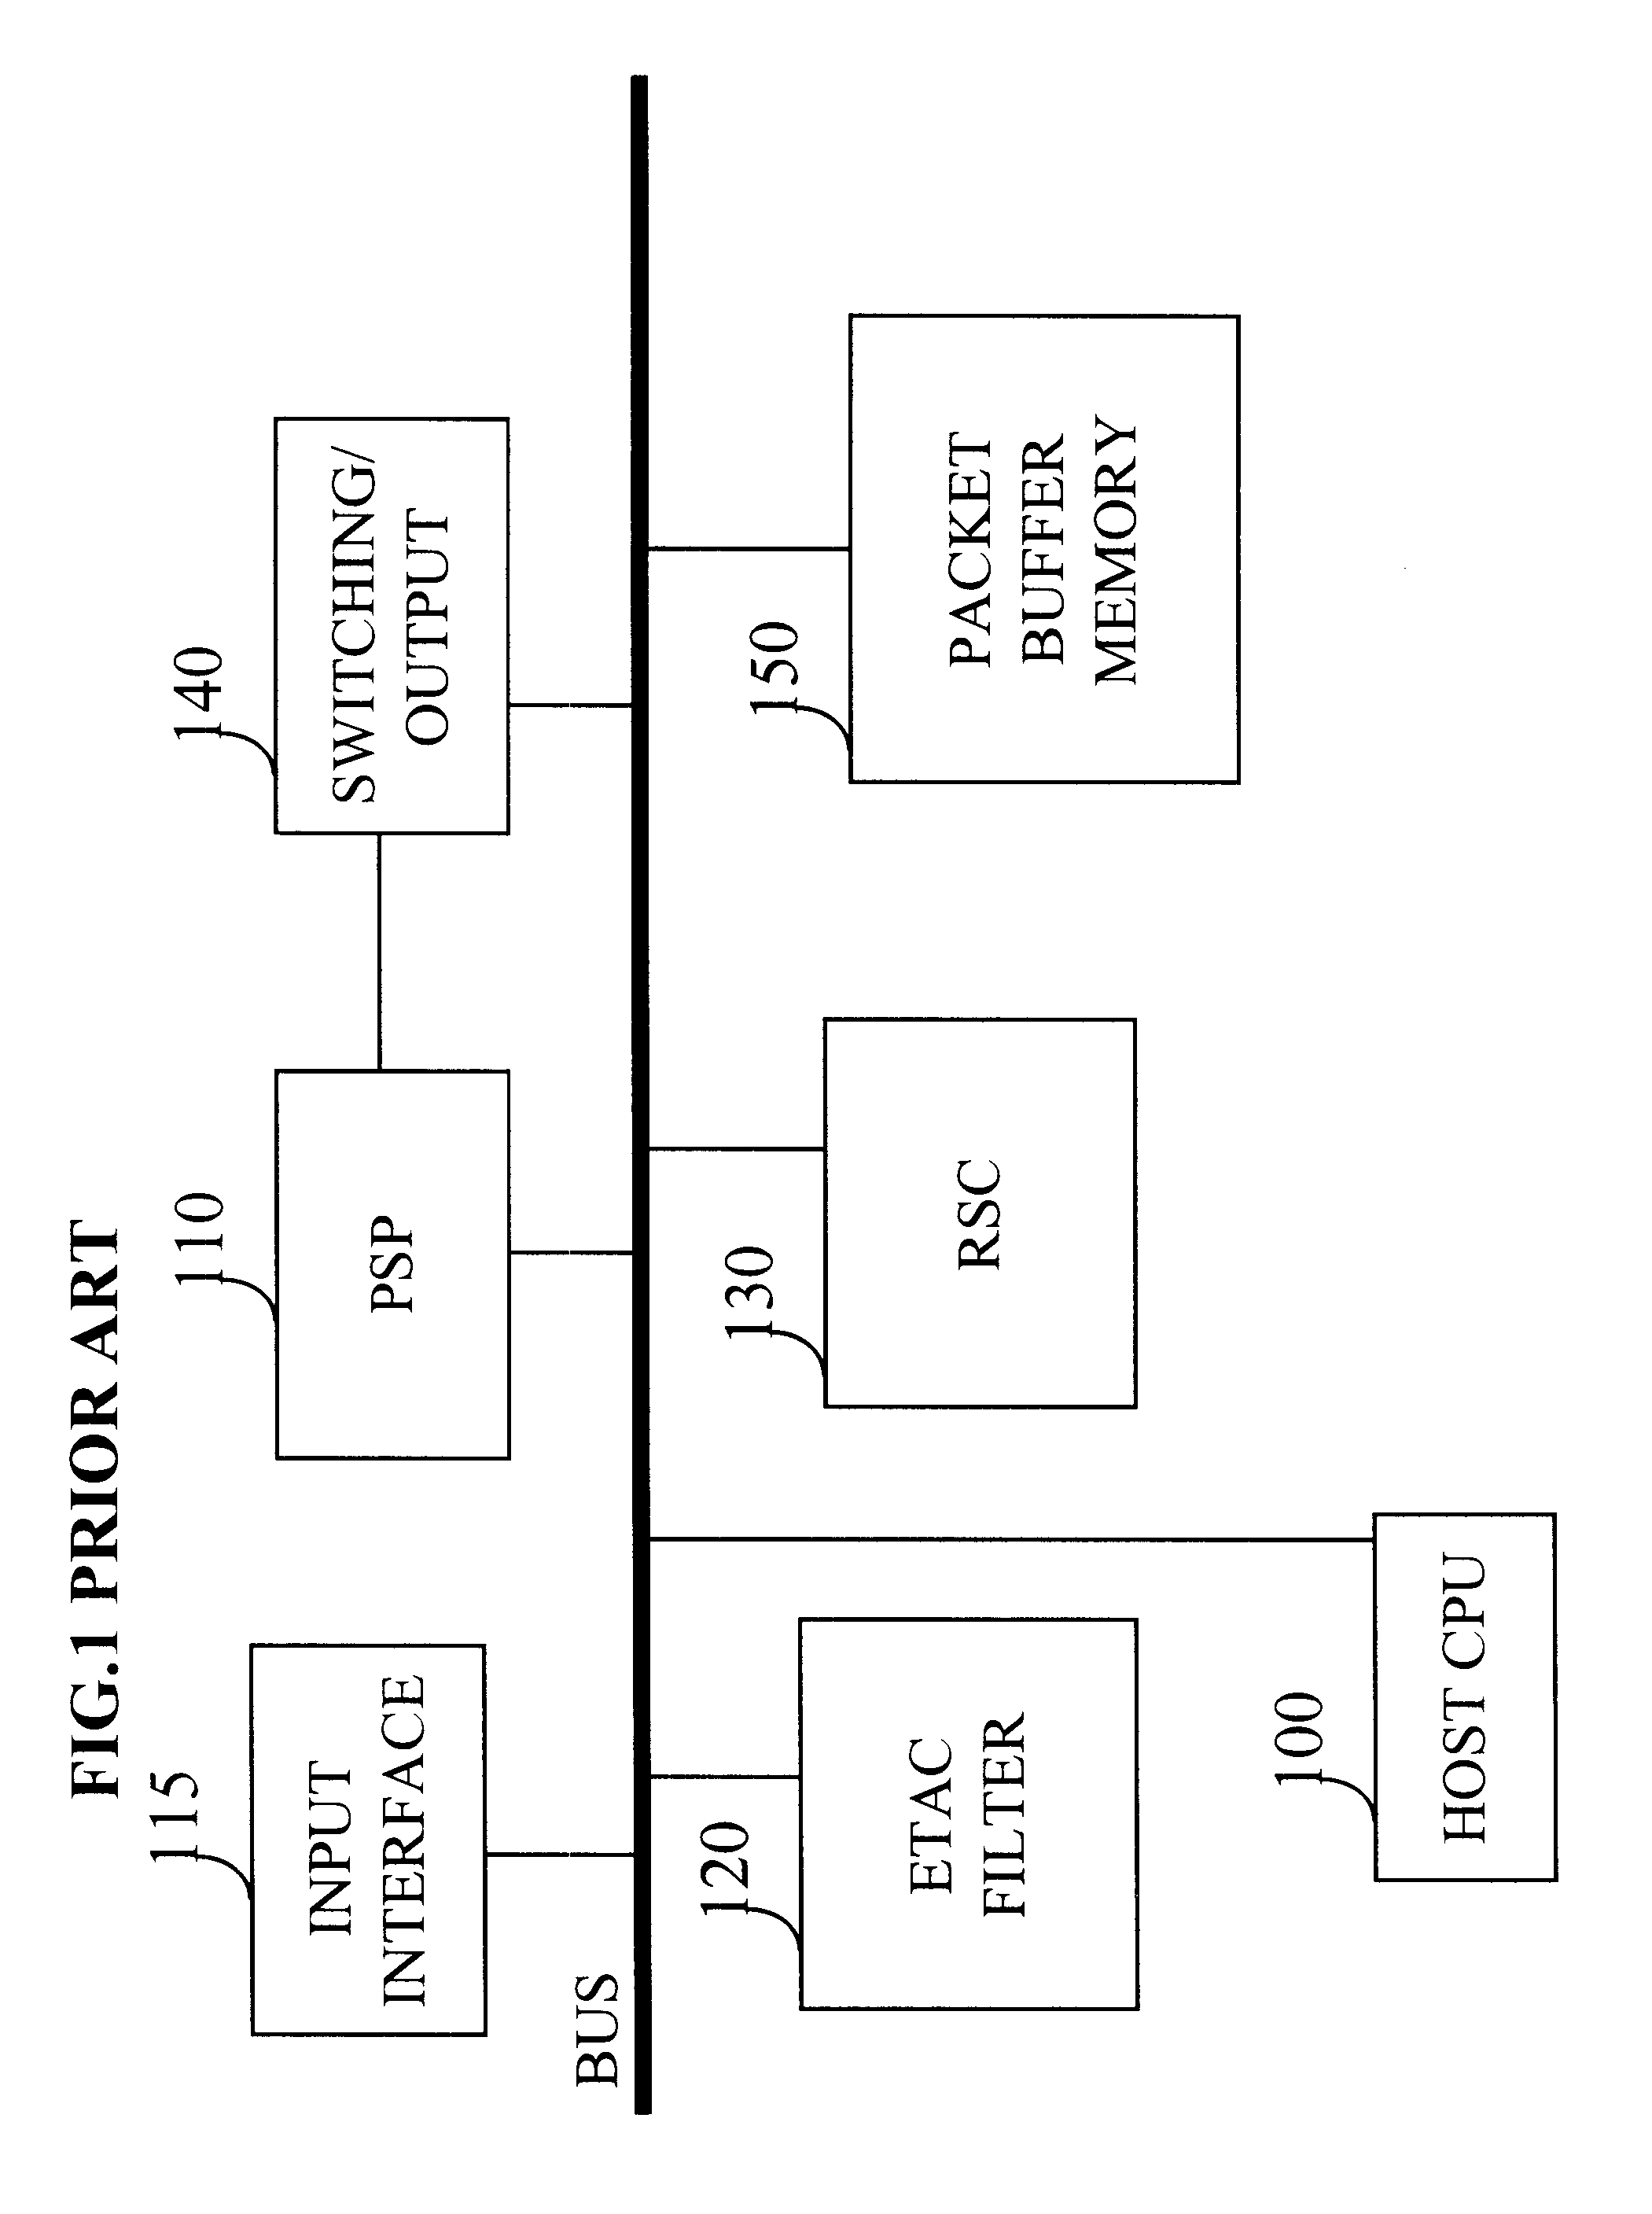 Programmable packet switching device